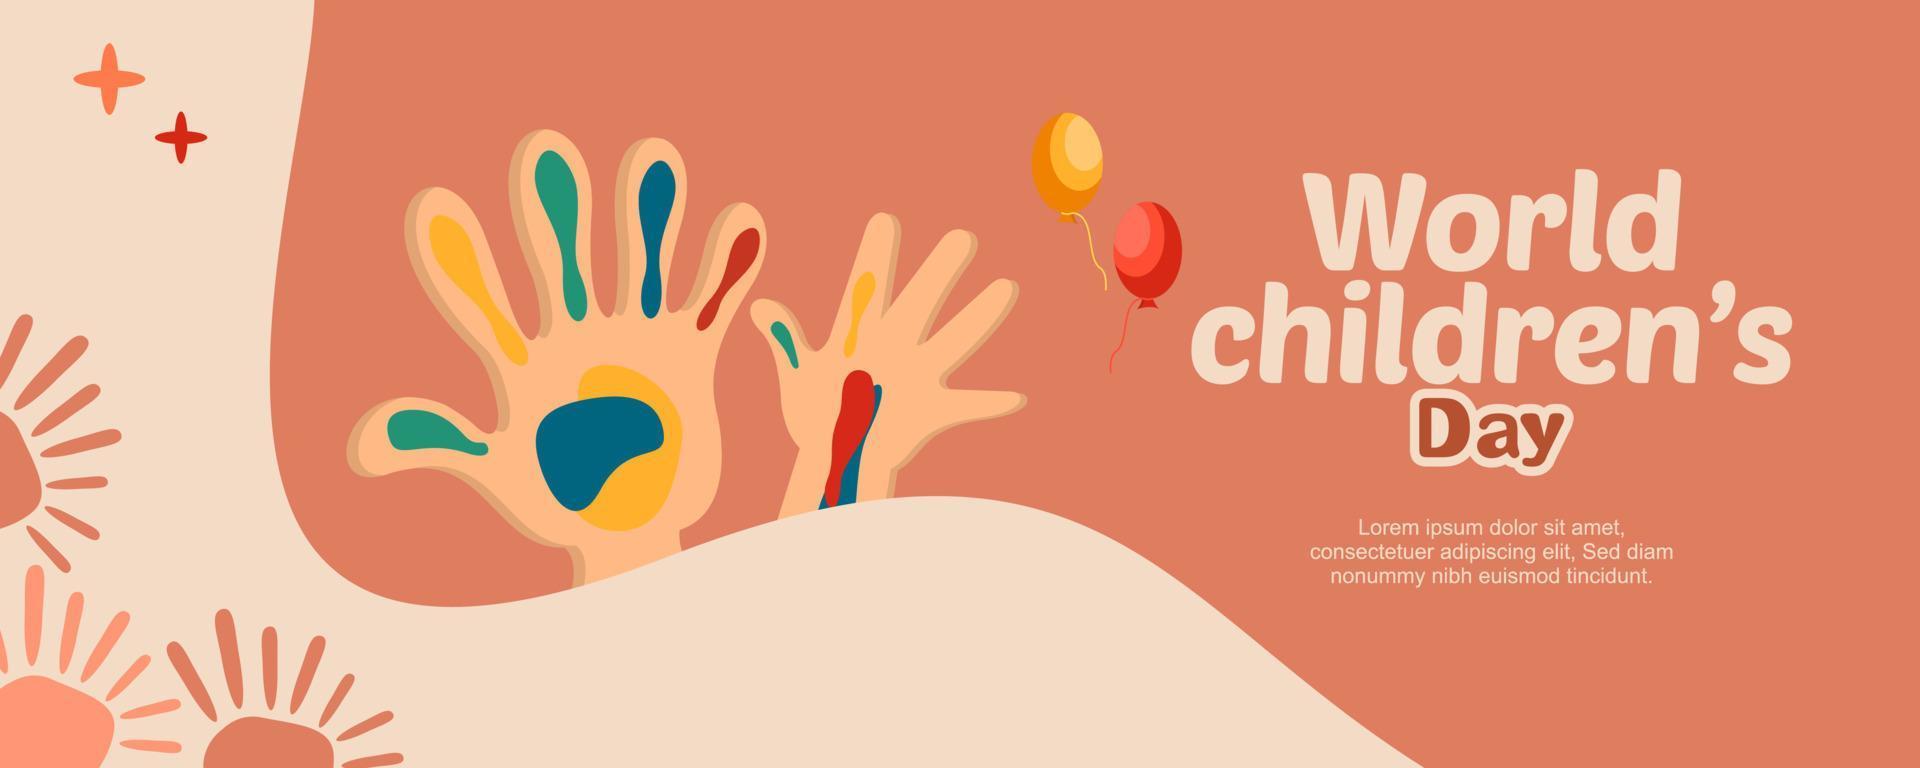 happy international children's day. hand illustration with ink doodles with clouds and a few stars. vector